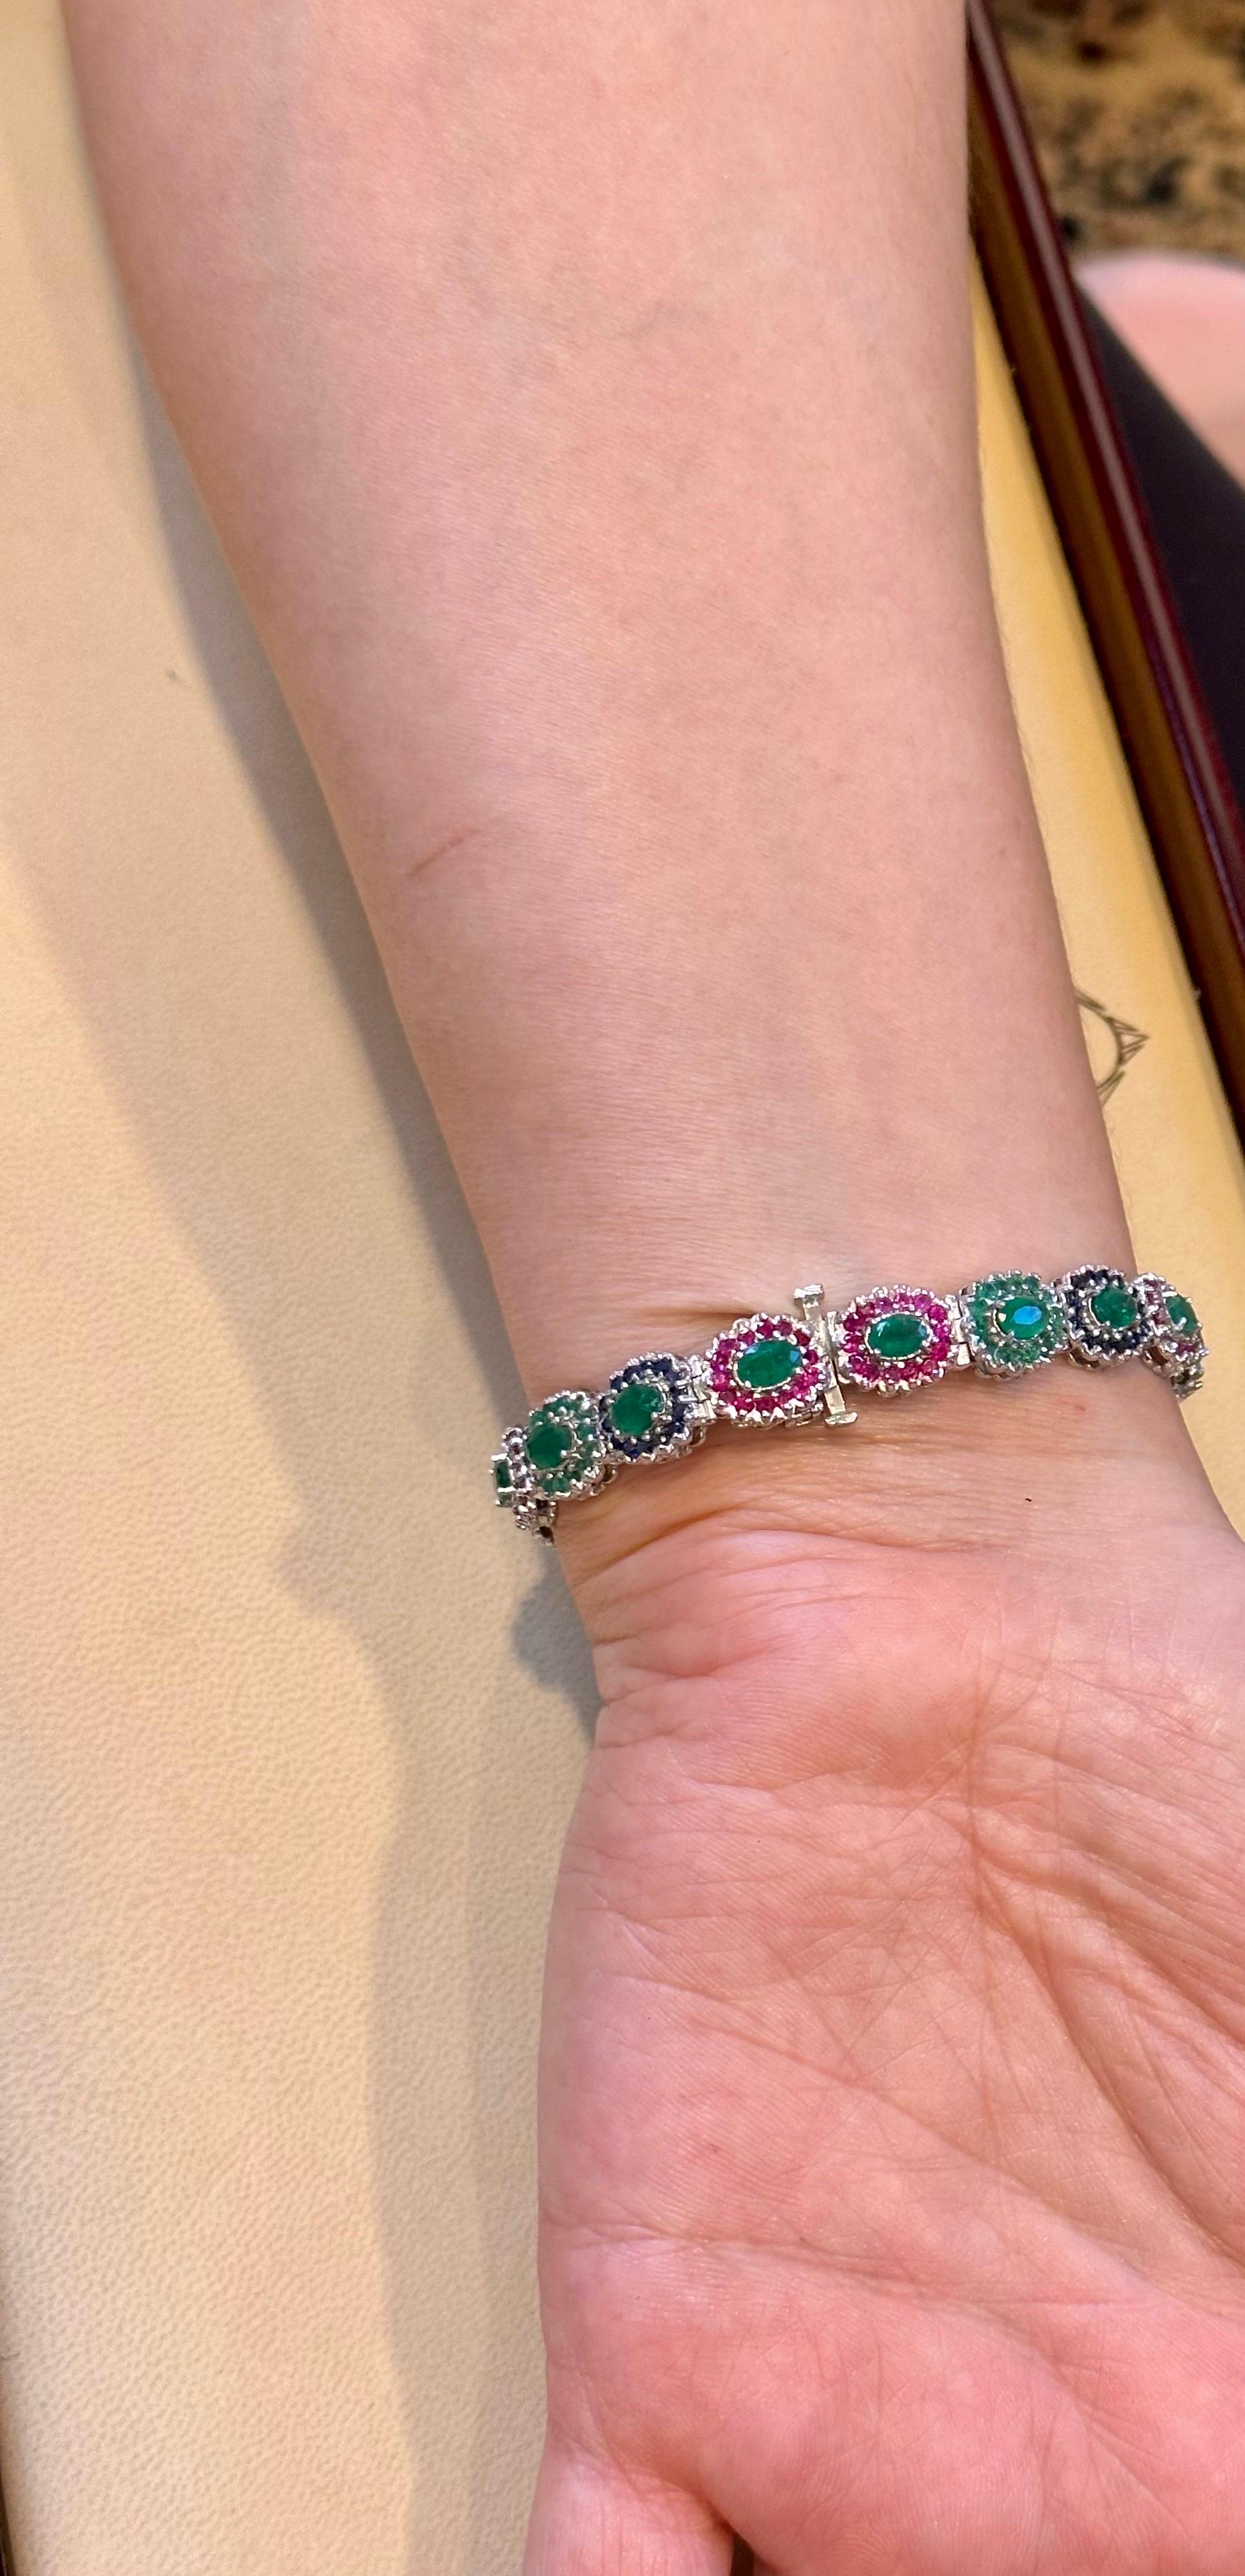 8 Ct Oval Cut Emerald & Ruby & Sapphire Tennis Bracelet 14 Kt White Gold 25.5Gm For Sale 12